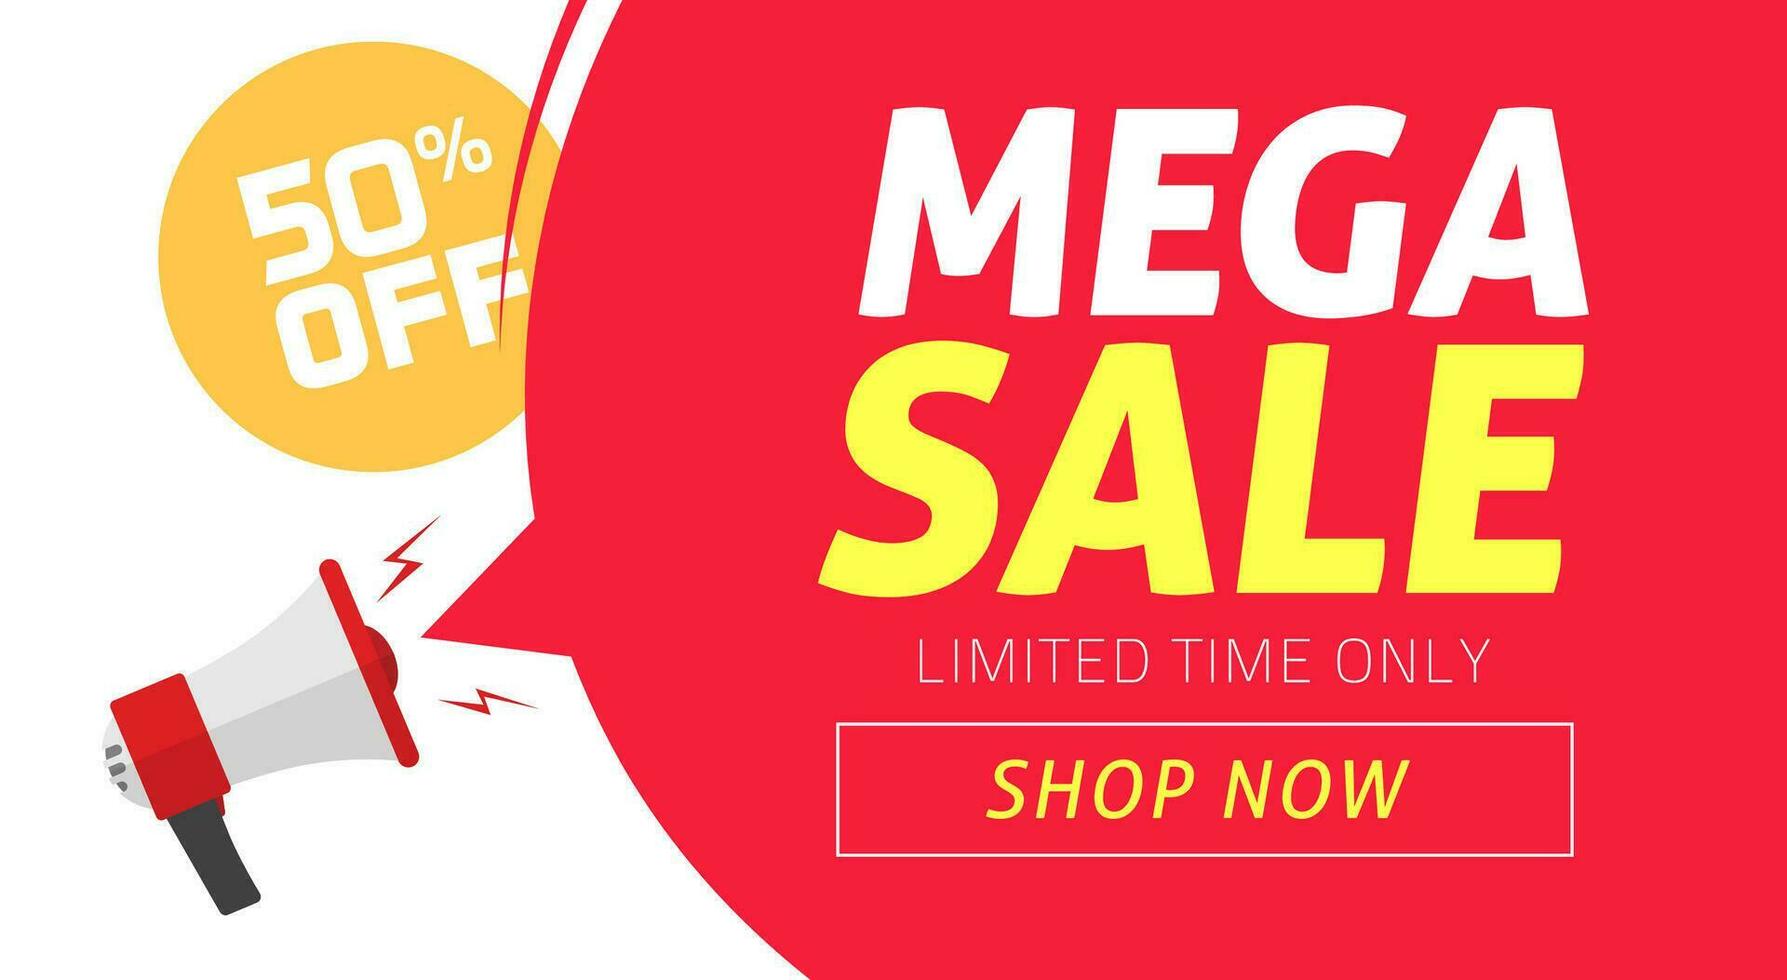 Mega sale banner design with off price discount offer tag and megaphone announce vector illustration, flat clearance promotion or special 50 percent deal off web coupon template or flyer image